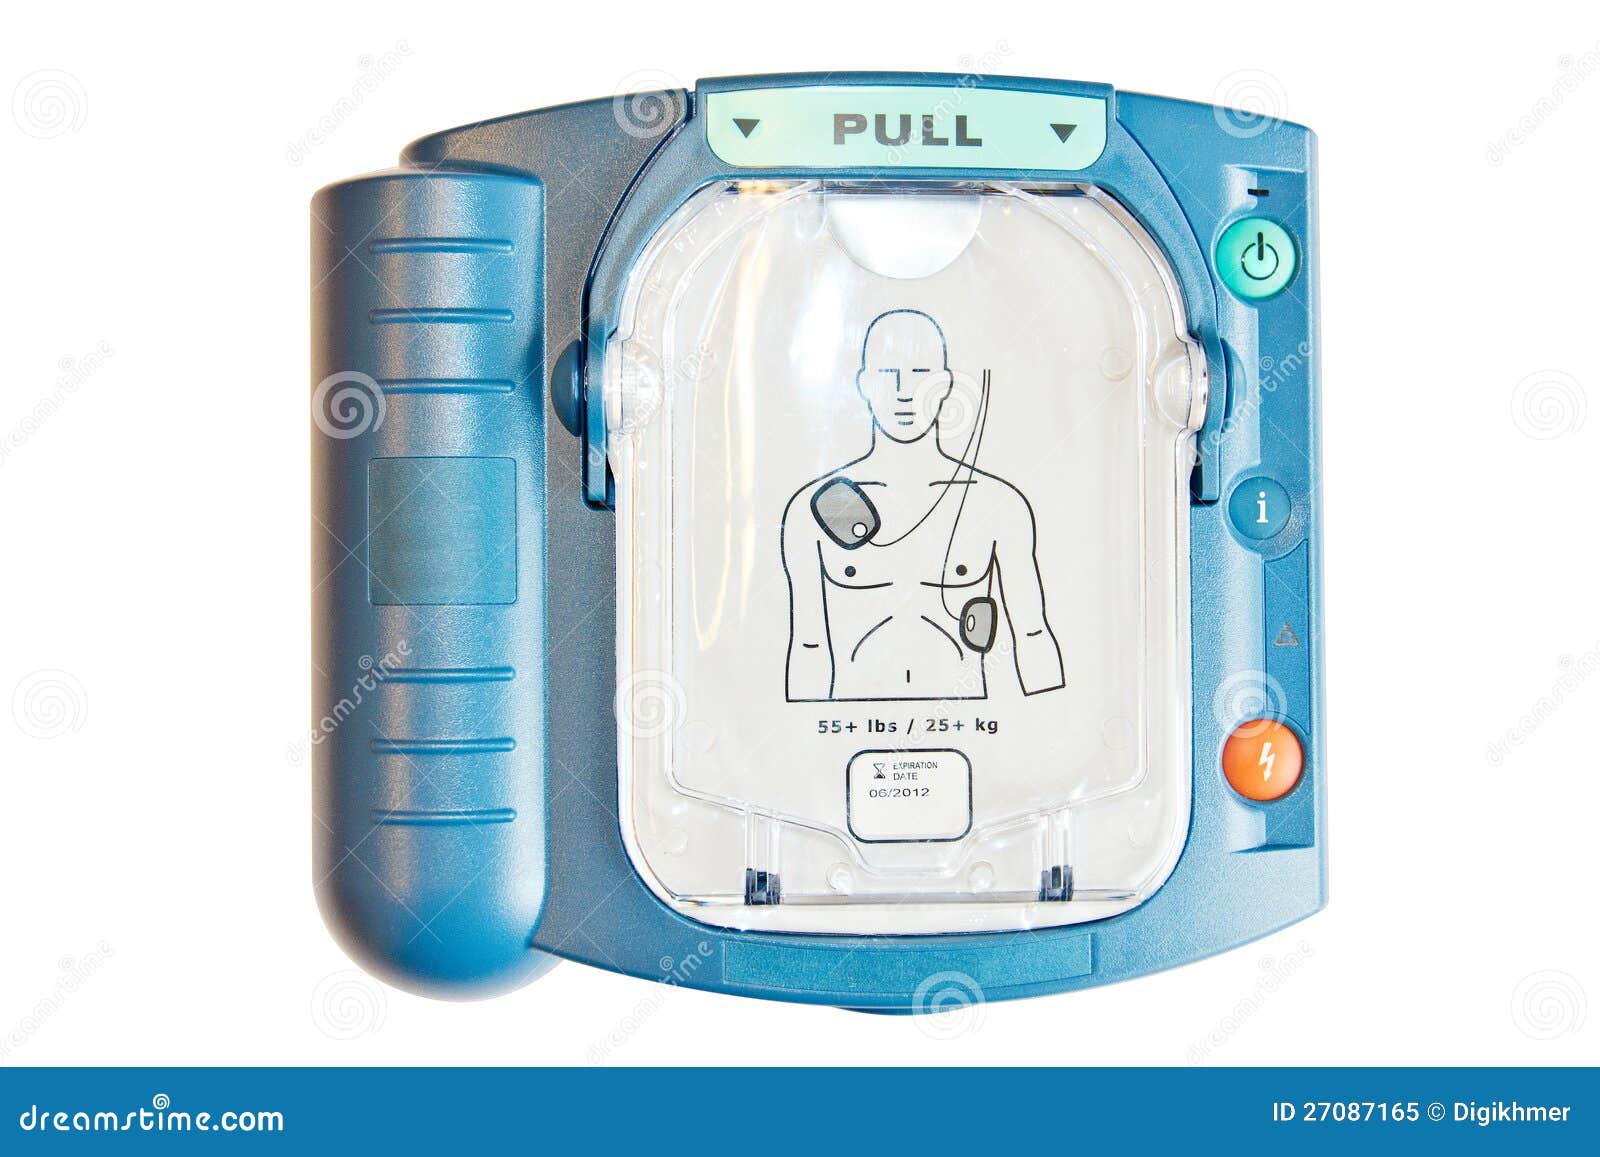 automated external defibrillator or aed